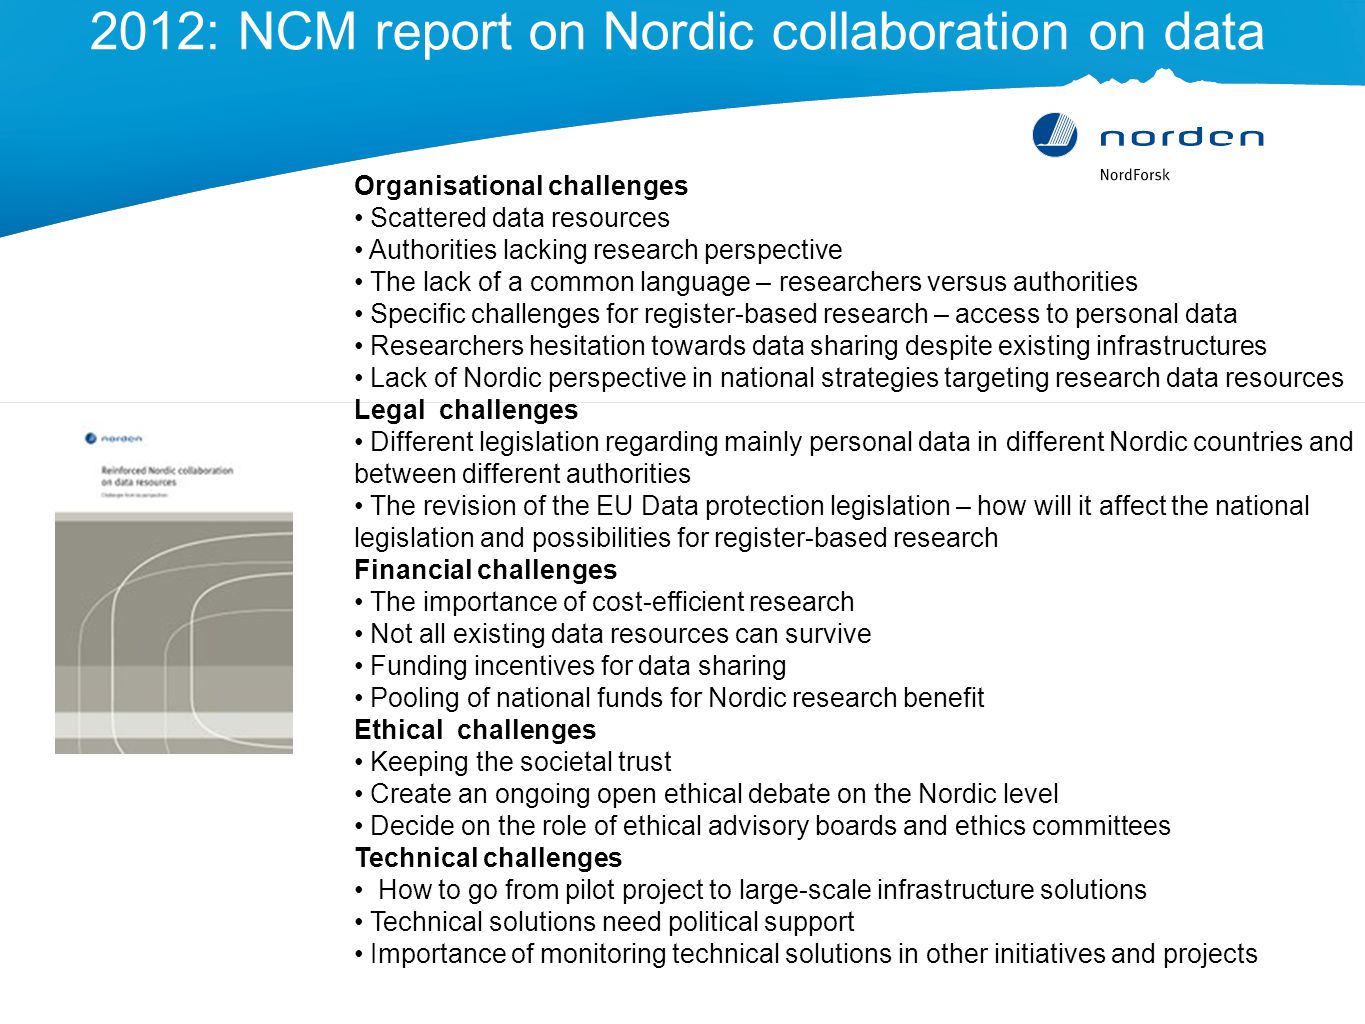 2012: NCM report on Nordic collaboration on data Organisational challenges Scattered data resources Authorities lacking research perspective The lack of a common language – researchers versus authorities Specific challenges for register-based research – access to personal data Researchers hesitation towards data sharing despite existing infrastructures Lack of Nordic perspective in national strategies targeting research data resources Legal challenges Different legislation regarding mainly personal data in different Nordic countries and between different authorities The revision of the EU Data protection legislation – how will it affect the national legislation and possibilities for register-based research Financial challenges The importance of cost-efficient research Not all existing data resources can survive Funding incentives for data sharing Pooling of national funds for Nordic research benefit Ethical challenges Keeping the societal trust Create an ongoing open ethical debate on the Nordic level Decide on the role of ethical advisory boards and ethics committees Technical challenges How to go from pilot project to large-scale infrastructure solutions Technical solutions need political support Importance of monitoring technical solutions in other initiatives and projects